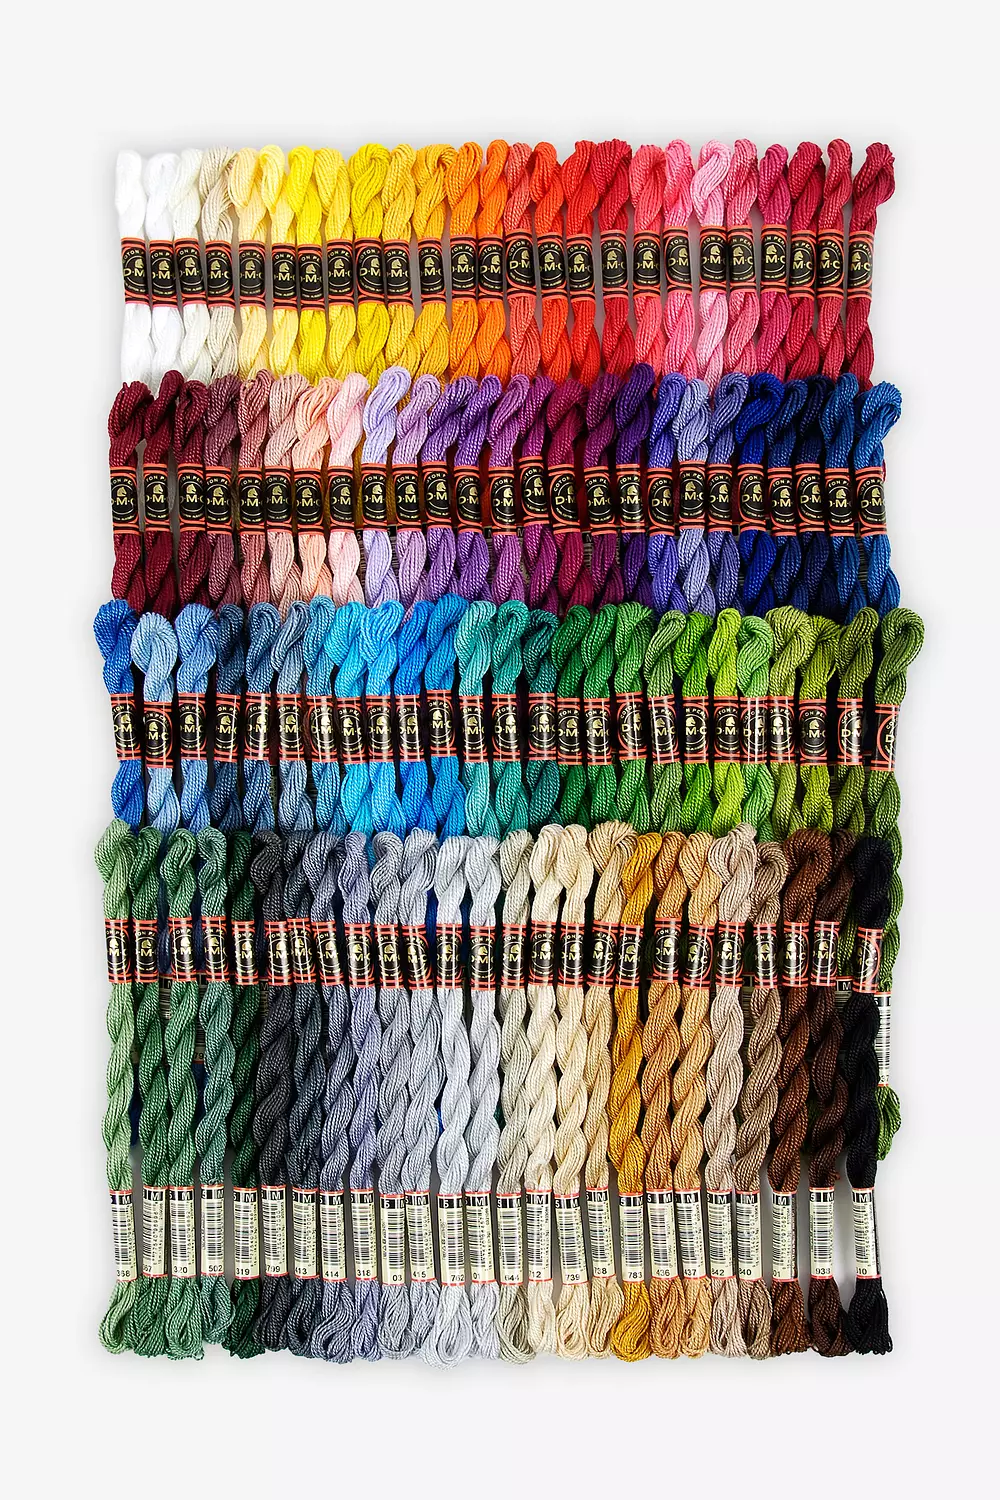 DMC Embroidery Threads: How They're Made & Whatnot –